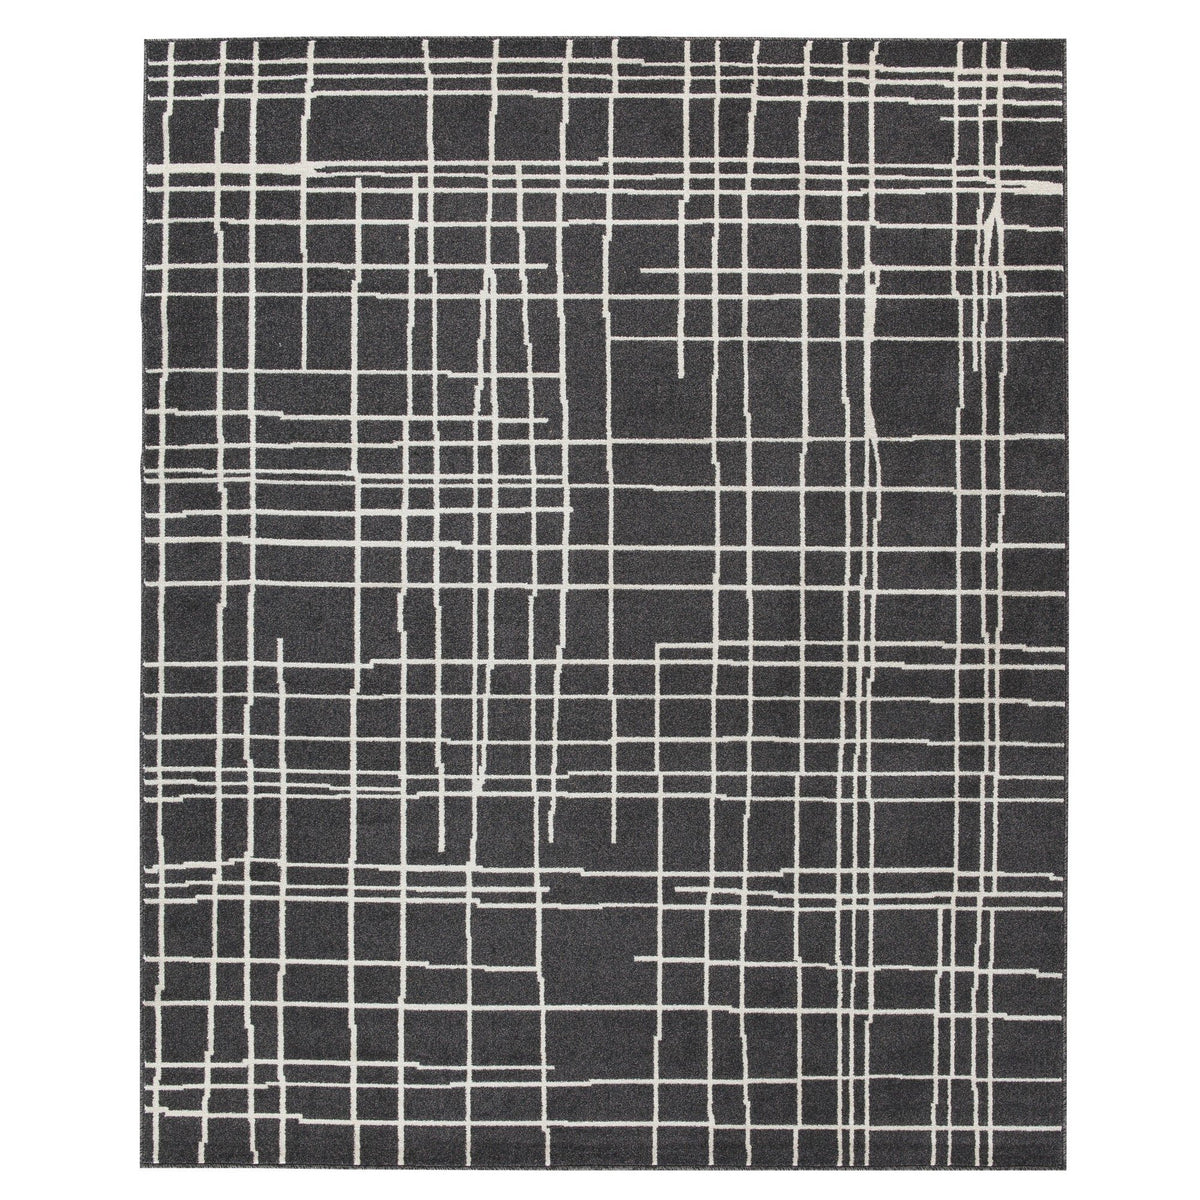 84 x 60 Inches Polypropylene Rug with Abstract Lines, White and Black - BM230960